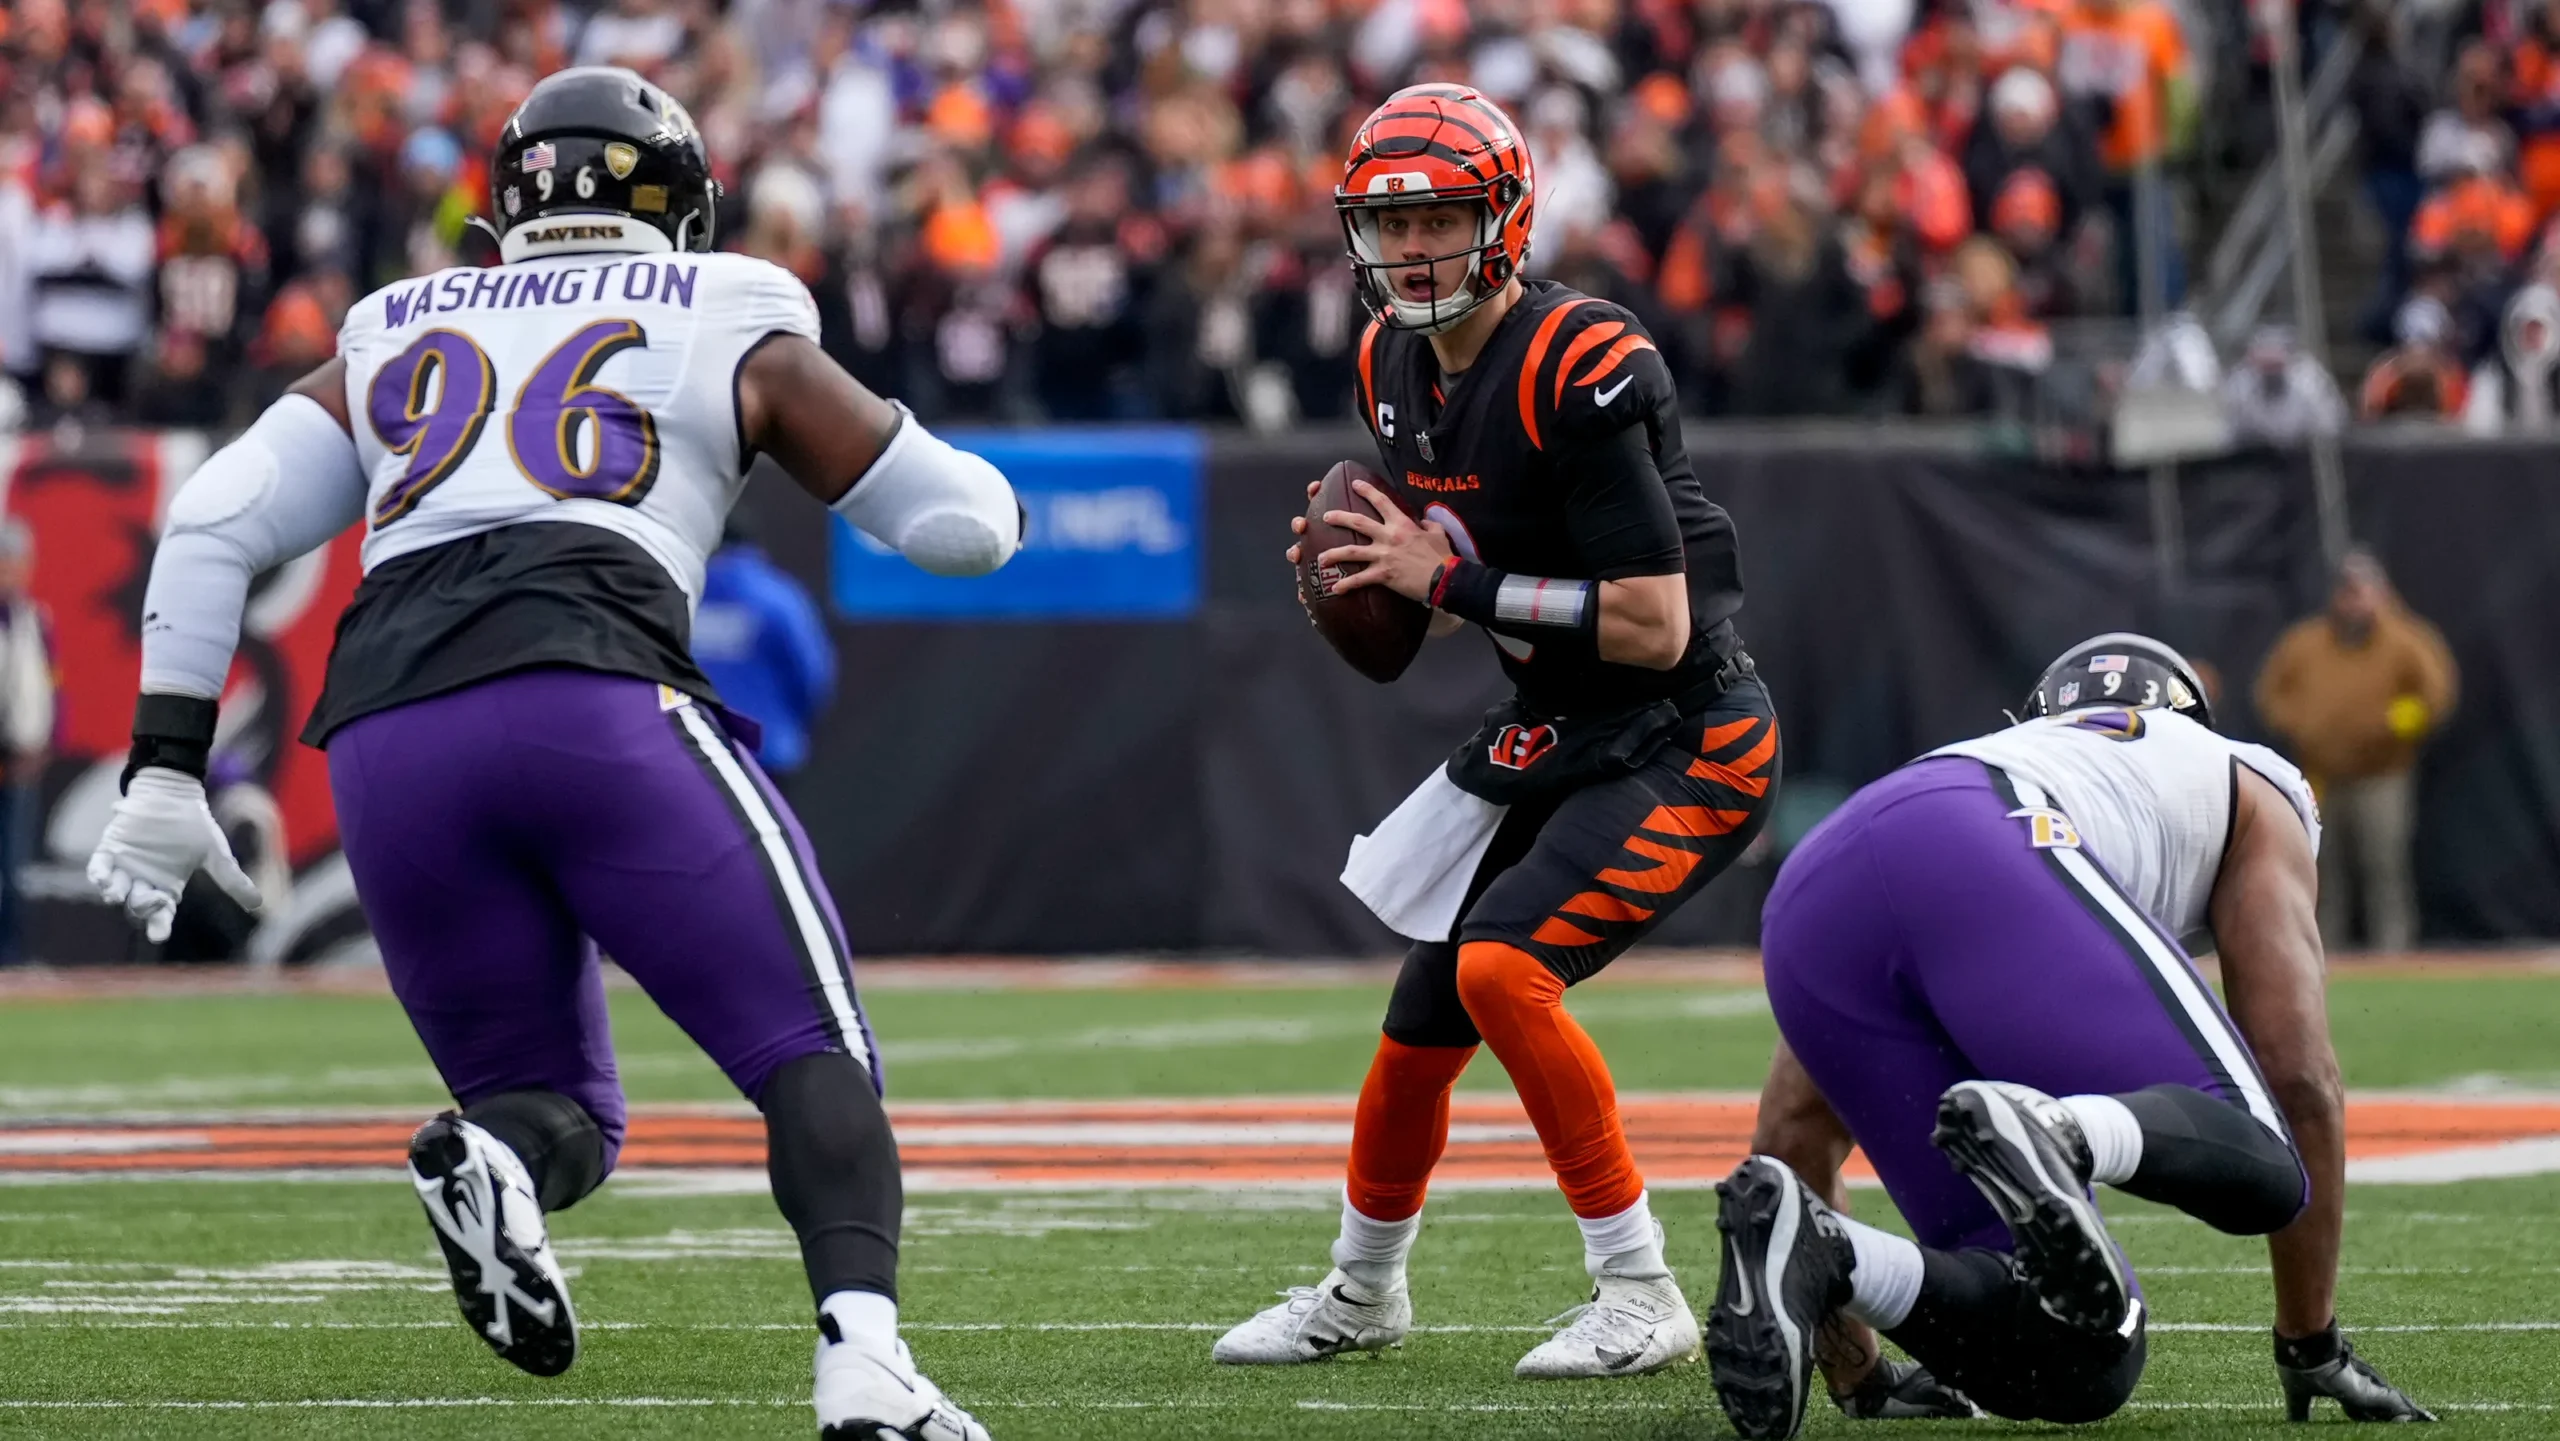 Bengals at Ravens for TNF: Preview and Free Pick